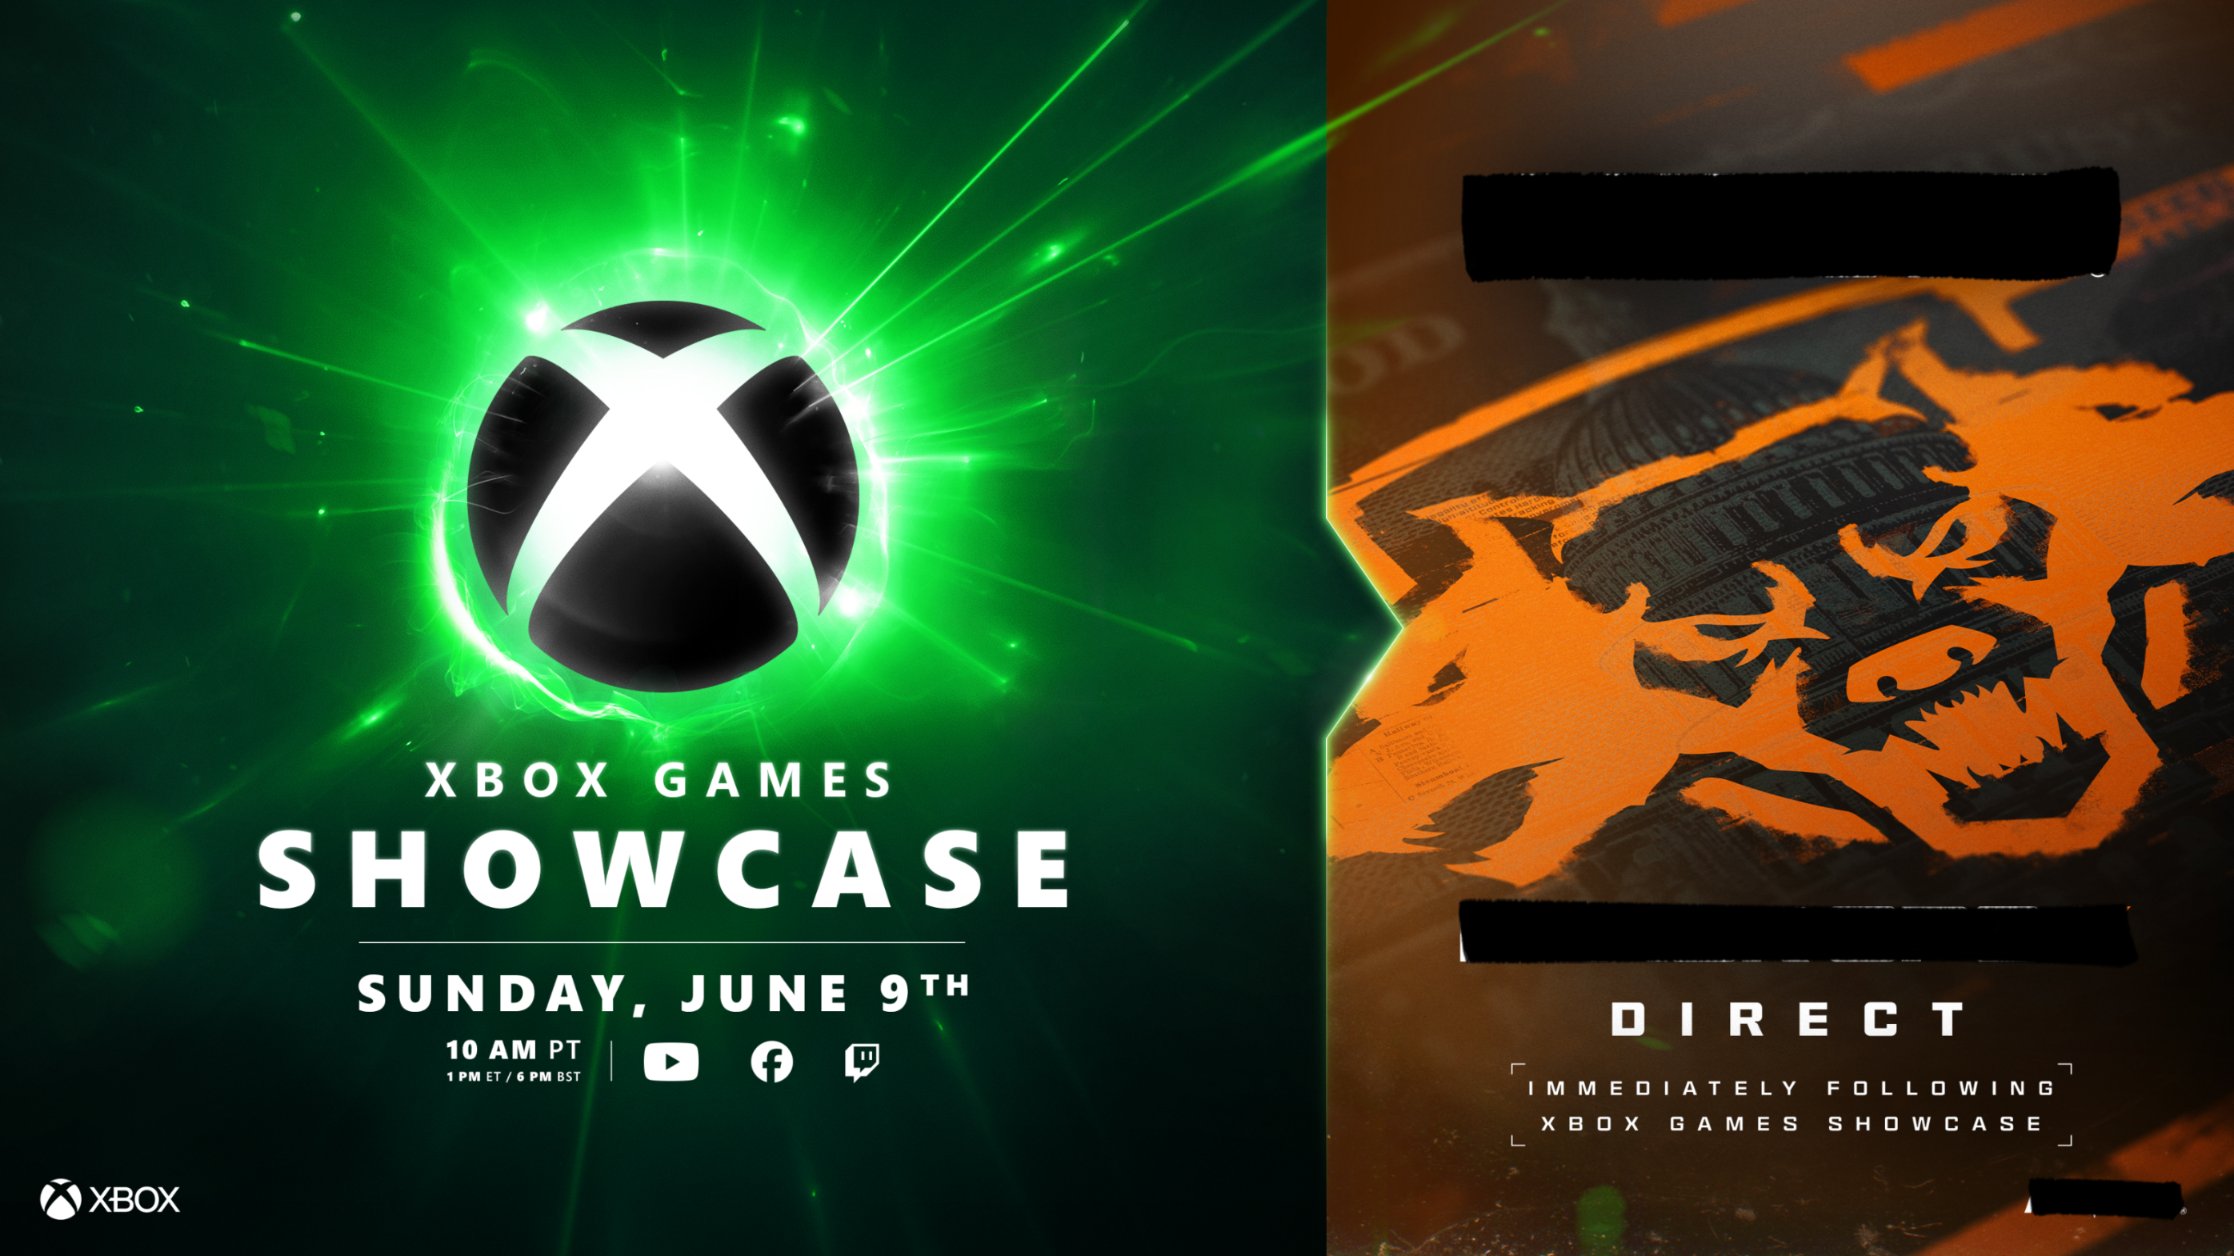 Microsoft confirms date for Xbox Games Showcase in June